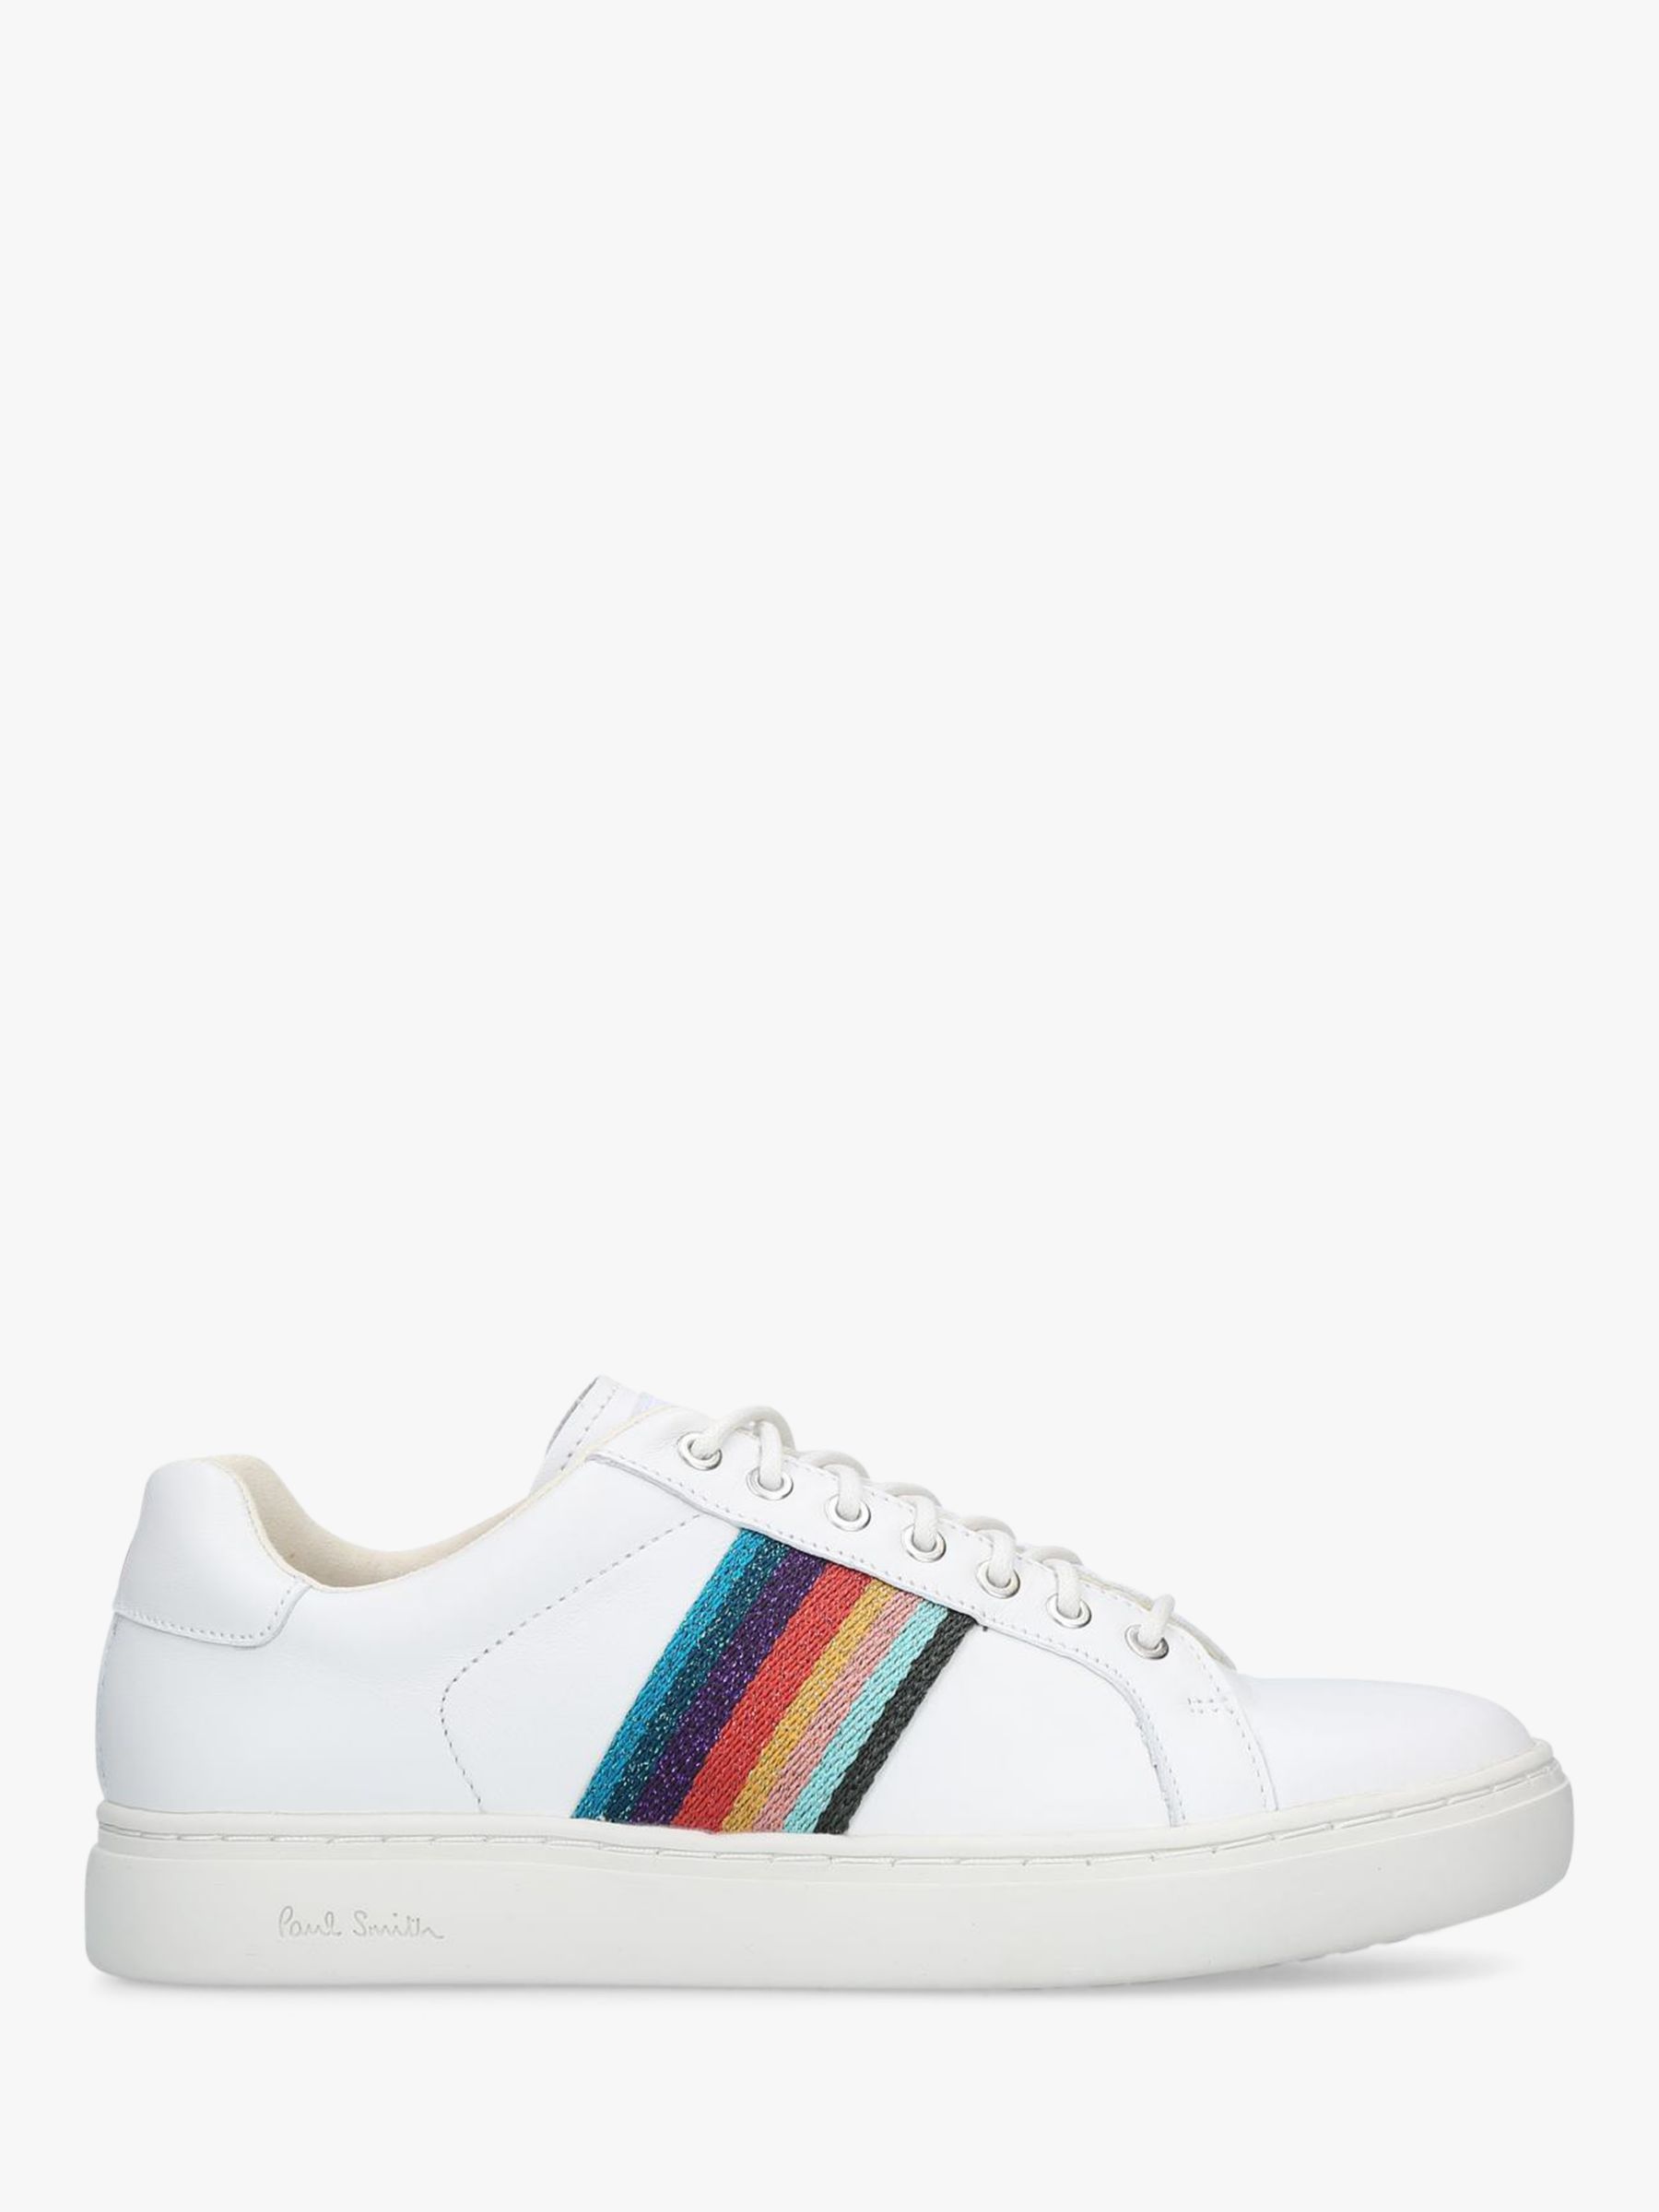 paul smith white lapin trainers